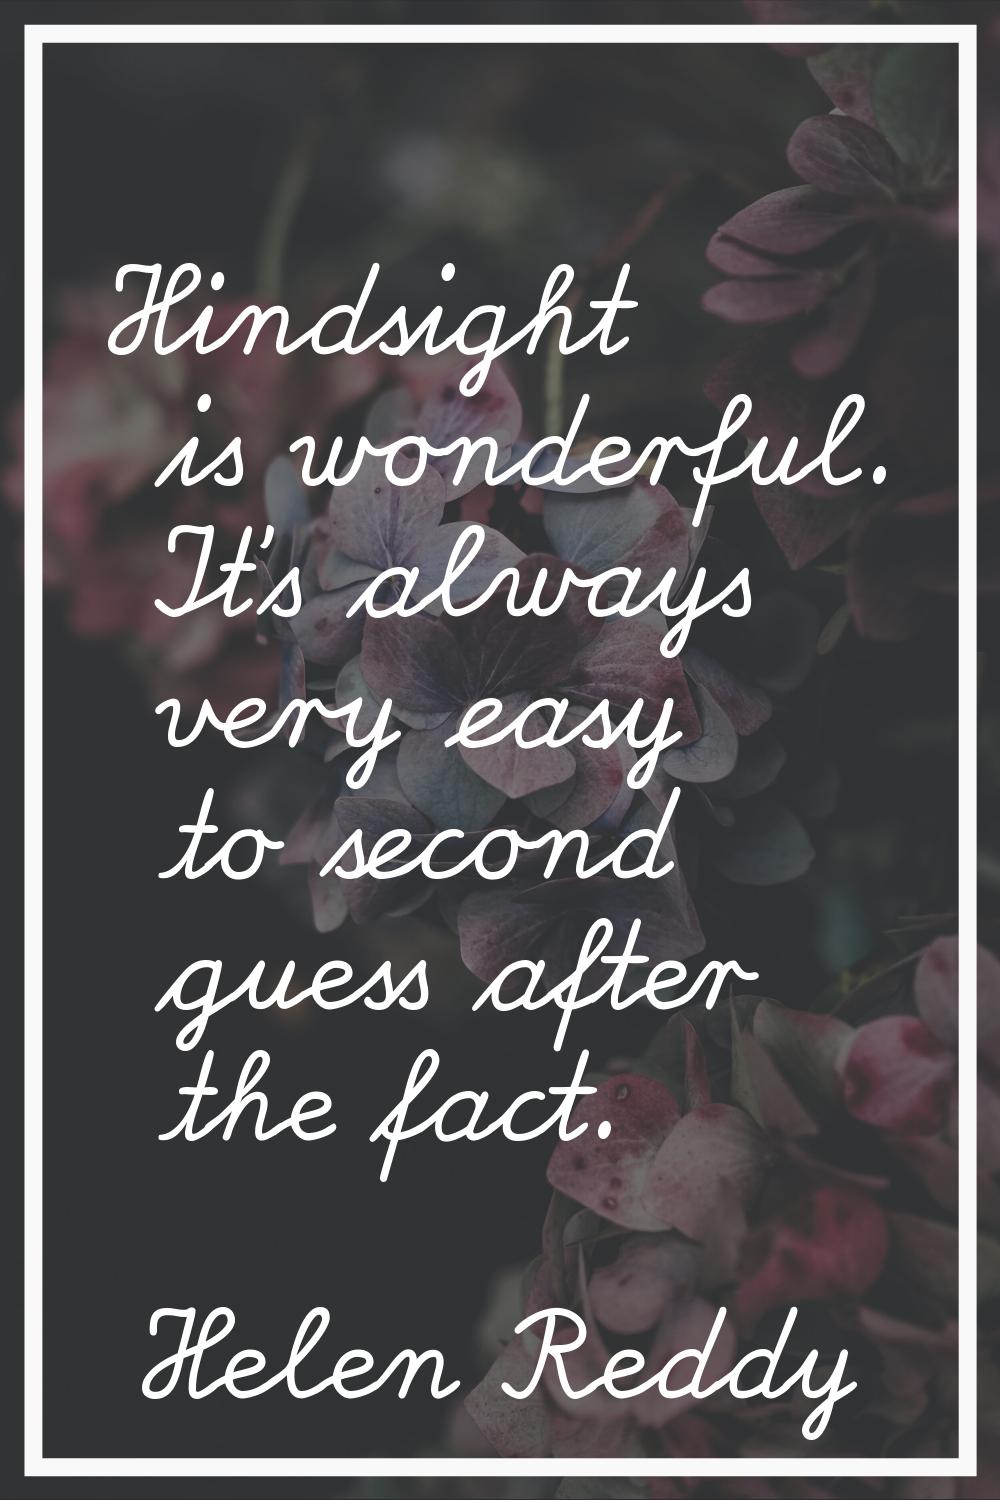 Hindsight is wonderful. It's always very easy to second guess after the fact.